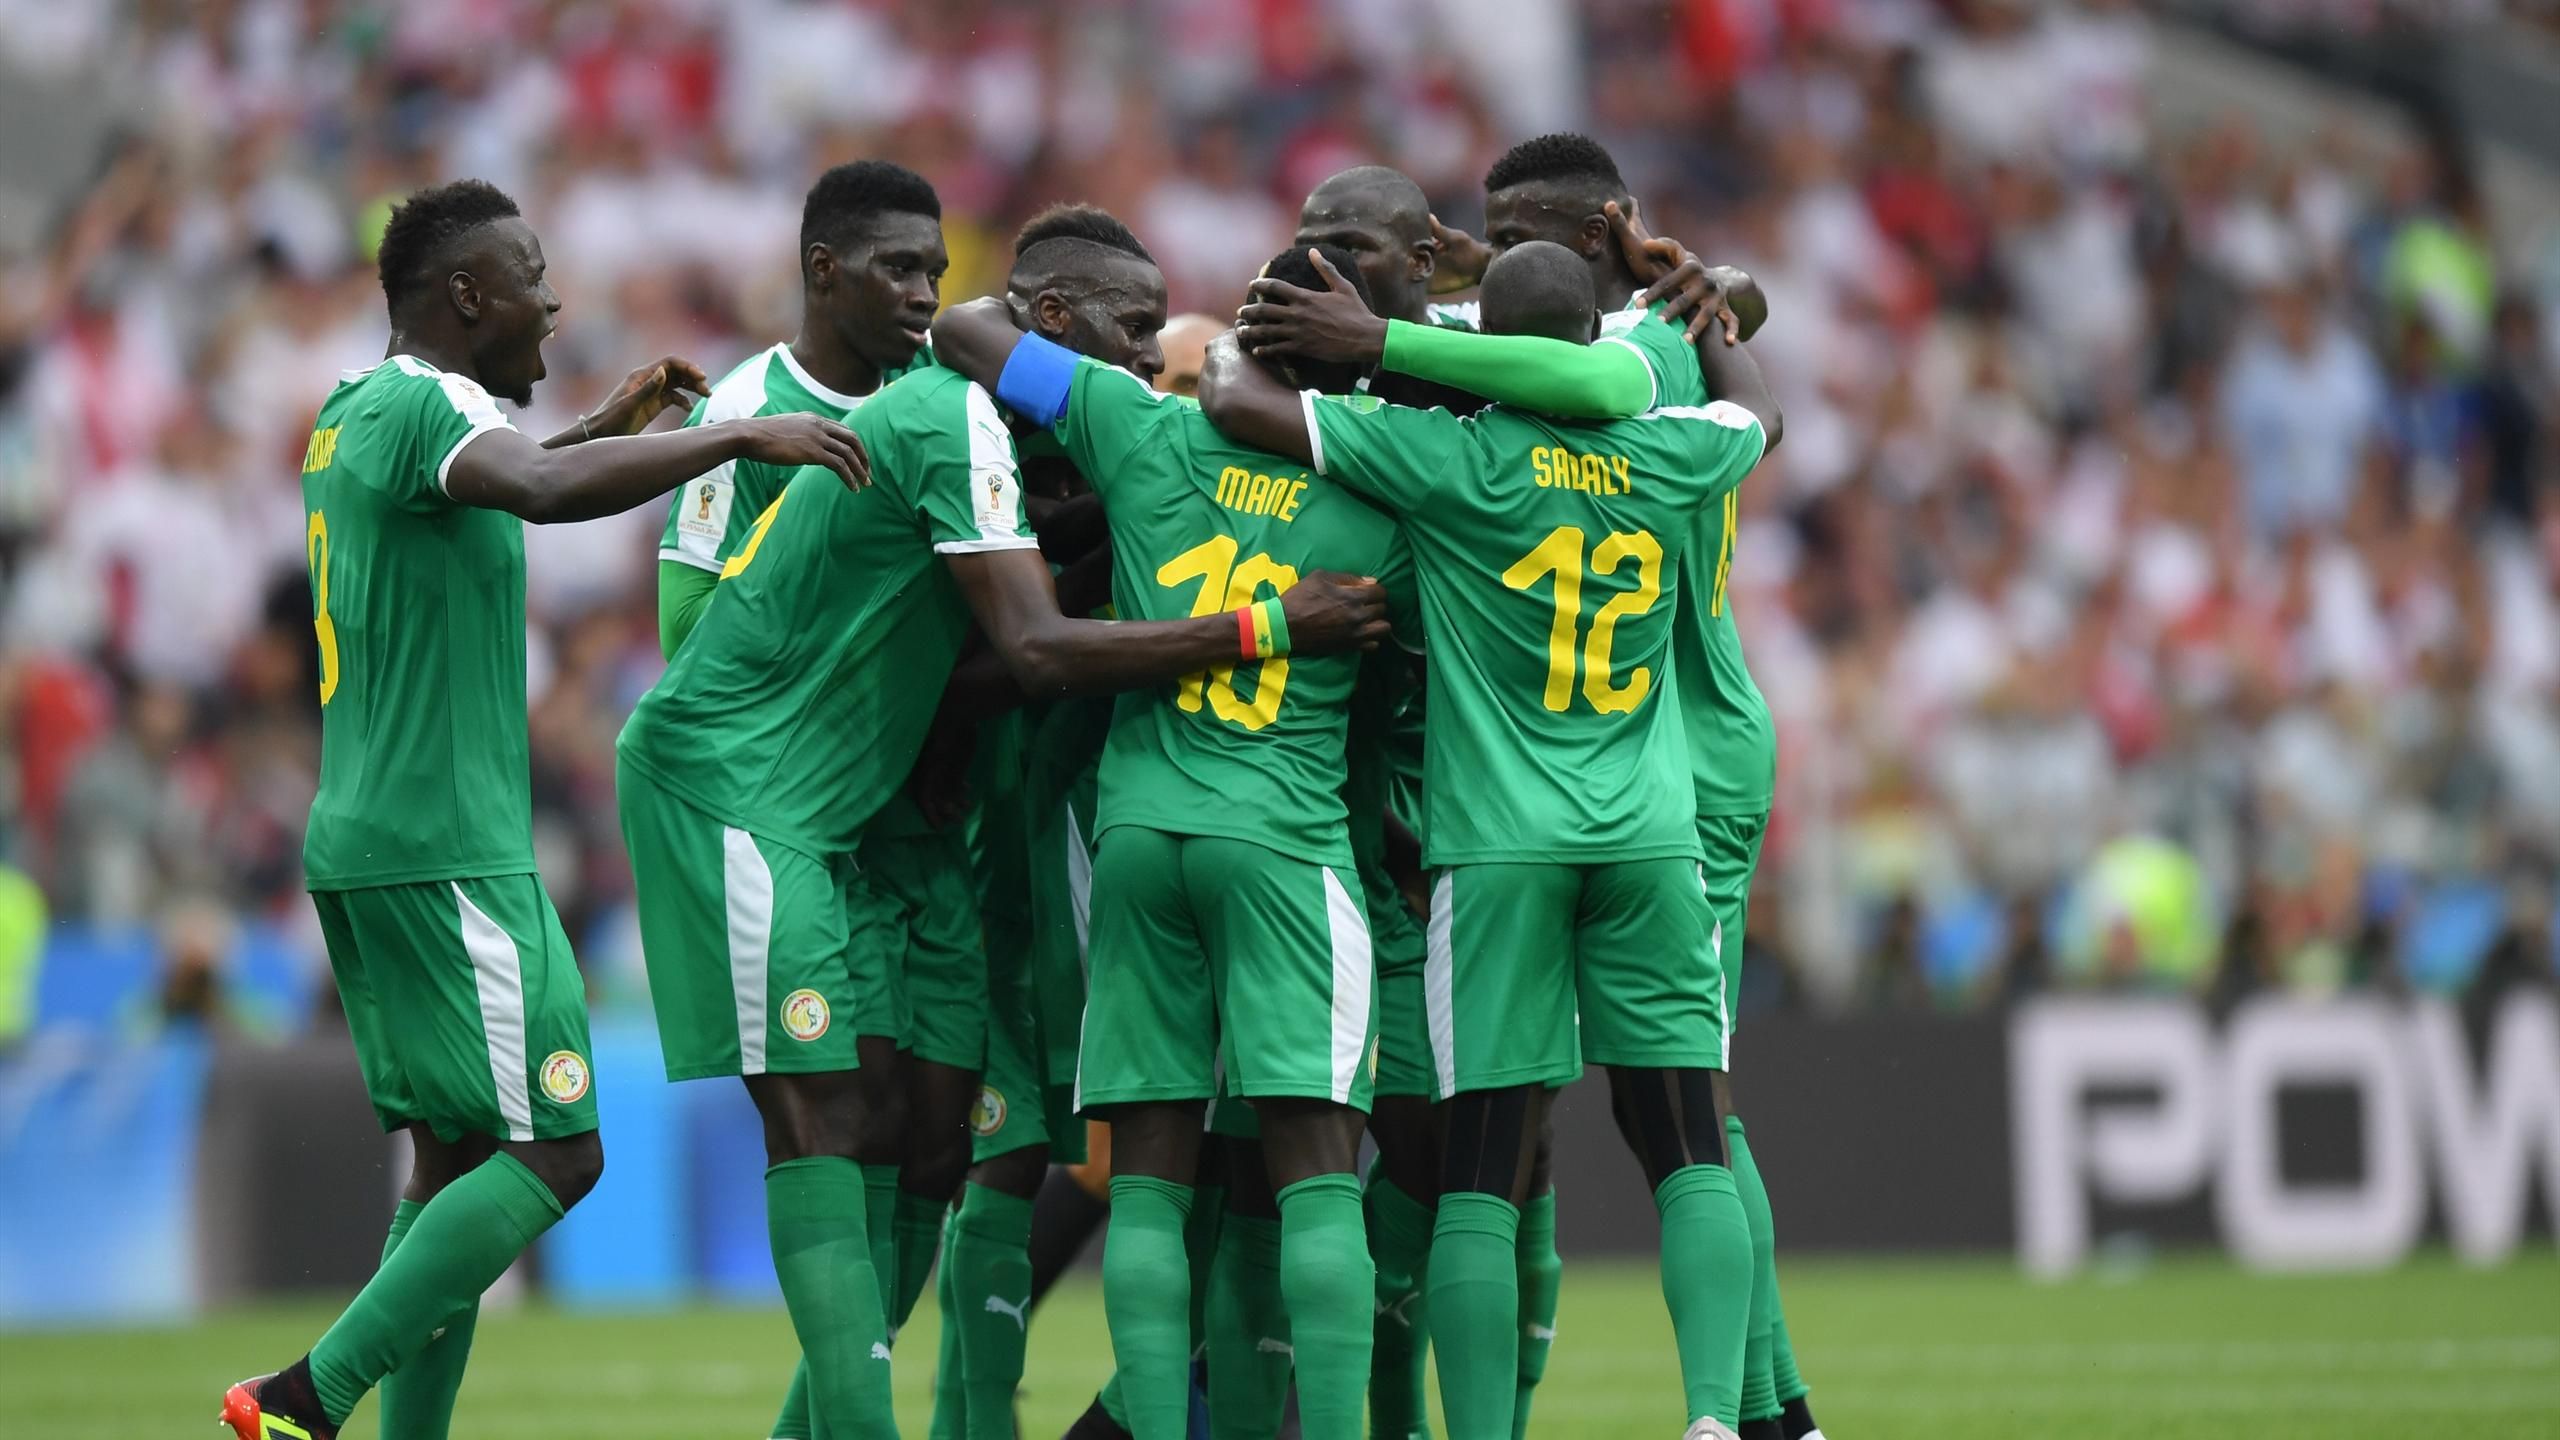 Alan Sugar Sparks Outrage With Racist Tweet About Senegal Team Tnt Sports 